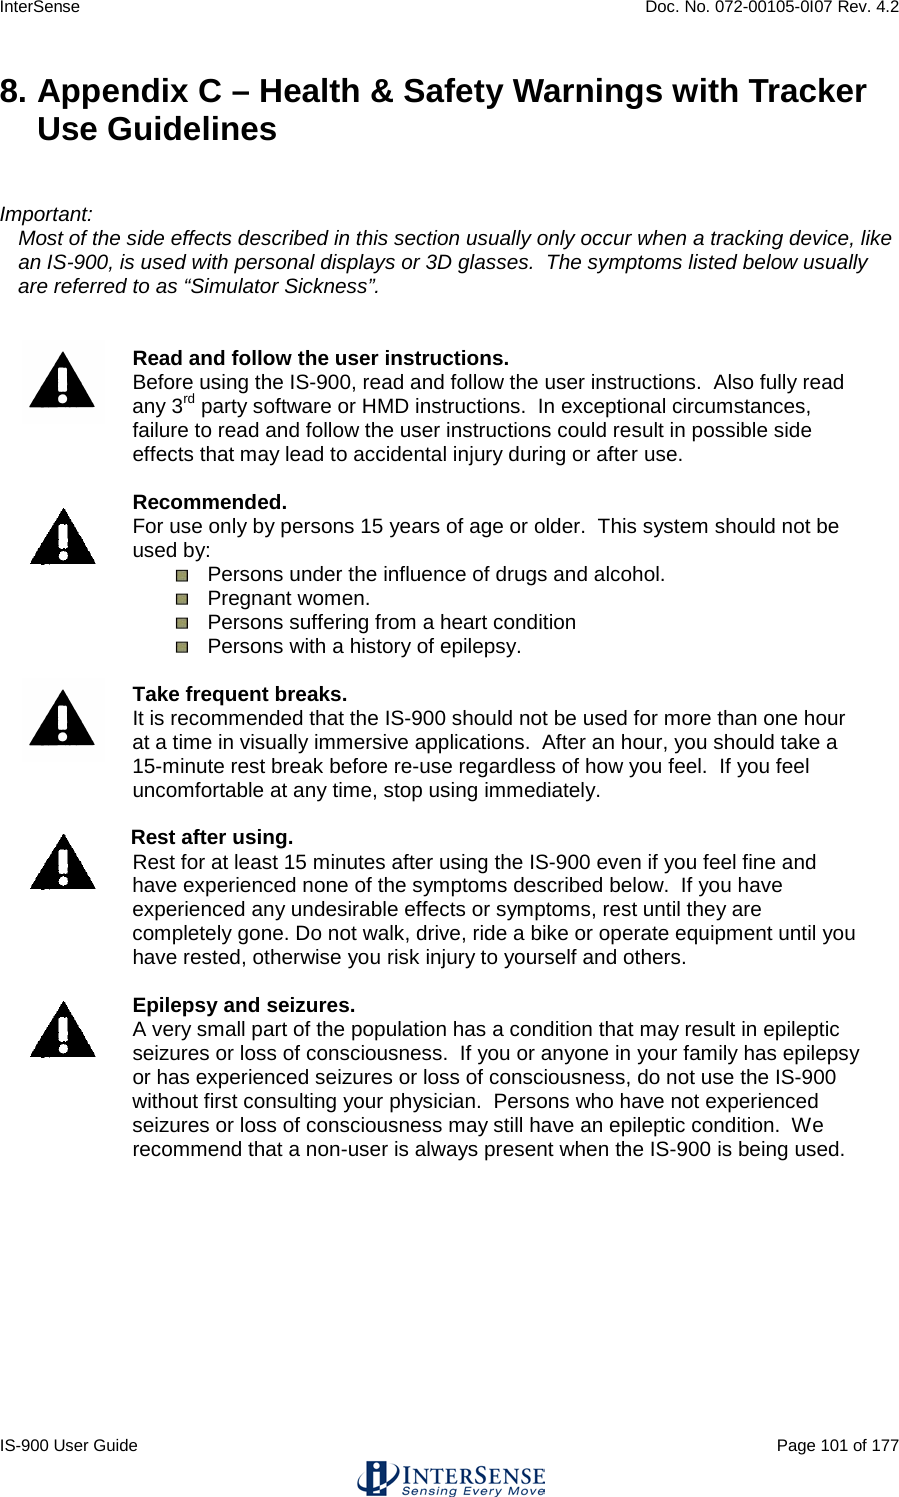 InterSense    Doc. No. 072-00105-0I07 Rev. 4.2 IS-900 User Guide                                                                                                                                          Page 101 of 177  8. Appendix C – Health &amp; Safety Warnings with Tracker Use Guidelines   Important: Most of the side effects described in this section usually only occur when a tracking device, like an IS-900, is used with personal displays or 3D glasses.  The symptoms listed below usually are referred to as “Simulator Sickness”.    Read and follow the user instructions. Before using the IS-900, read and follow the user instructions.  Also fully read any 3rd party software or HMD instructions.  In exceptional circumstances, failure to read and follow the user instructions could result in possible side effects that may lead to accidental injury during or after use.     Recommended. For use only by persons 15 years of age or older.  This system should not be used by:  Persons under the influence of drugs and alcohol.  Pregnant women.  Persons suffering from a heart condition  Persons with a history of epilepsy.   Take frequent breaks. It is recommended that the IS-900 should not be used for more than one hour at a time in visually immersive applications.  After an hour, you should take a 15-minute rest break before re-use regardless of how you feel.  If you feel uncomfortable at any time, stop using immediately.   Rest after using. Rest for at least 15 minutes after using the IS-900 even if you feel fine and have experienced none of the symptoms described below.  If you have experienced any undesirable effects or symptoms, rest until they are completely gone. Do not walk, drive, ride a bike or operate equipment until you have rested, otherwise you risk injury to yourself and others.   Epilepsy and seizures. A very small part of the population has a condition that may result in epileptic seizures or loss of consciousness.  If you or anyone in your family has epilepsy or has experienced seizures or loss of consciousness, do not use the IS-900 without first consulting your physician.  Persons who have not experienced seizures or loss of consciousness may still have an epileptic condition.  We recommend that a non-user is always present when the IS-900 is being used.    